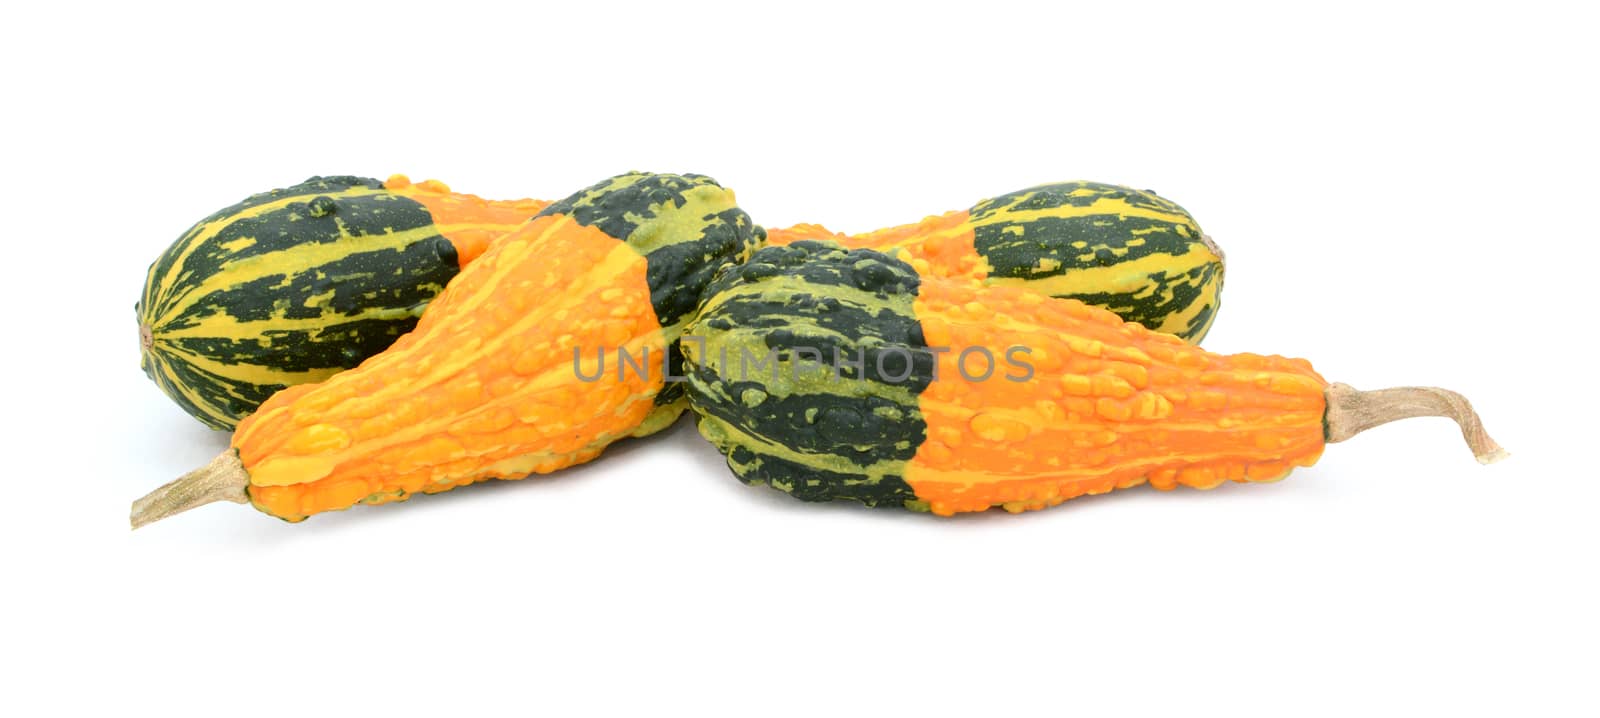 Four pear-shaped ornamental gourds with orange and green stripes by sarahdoow